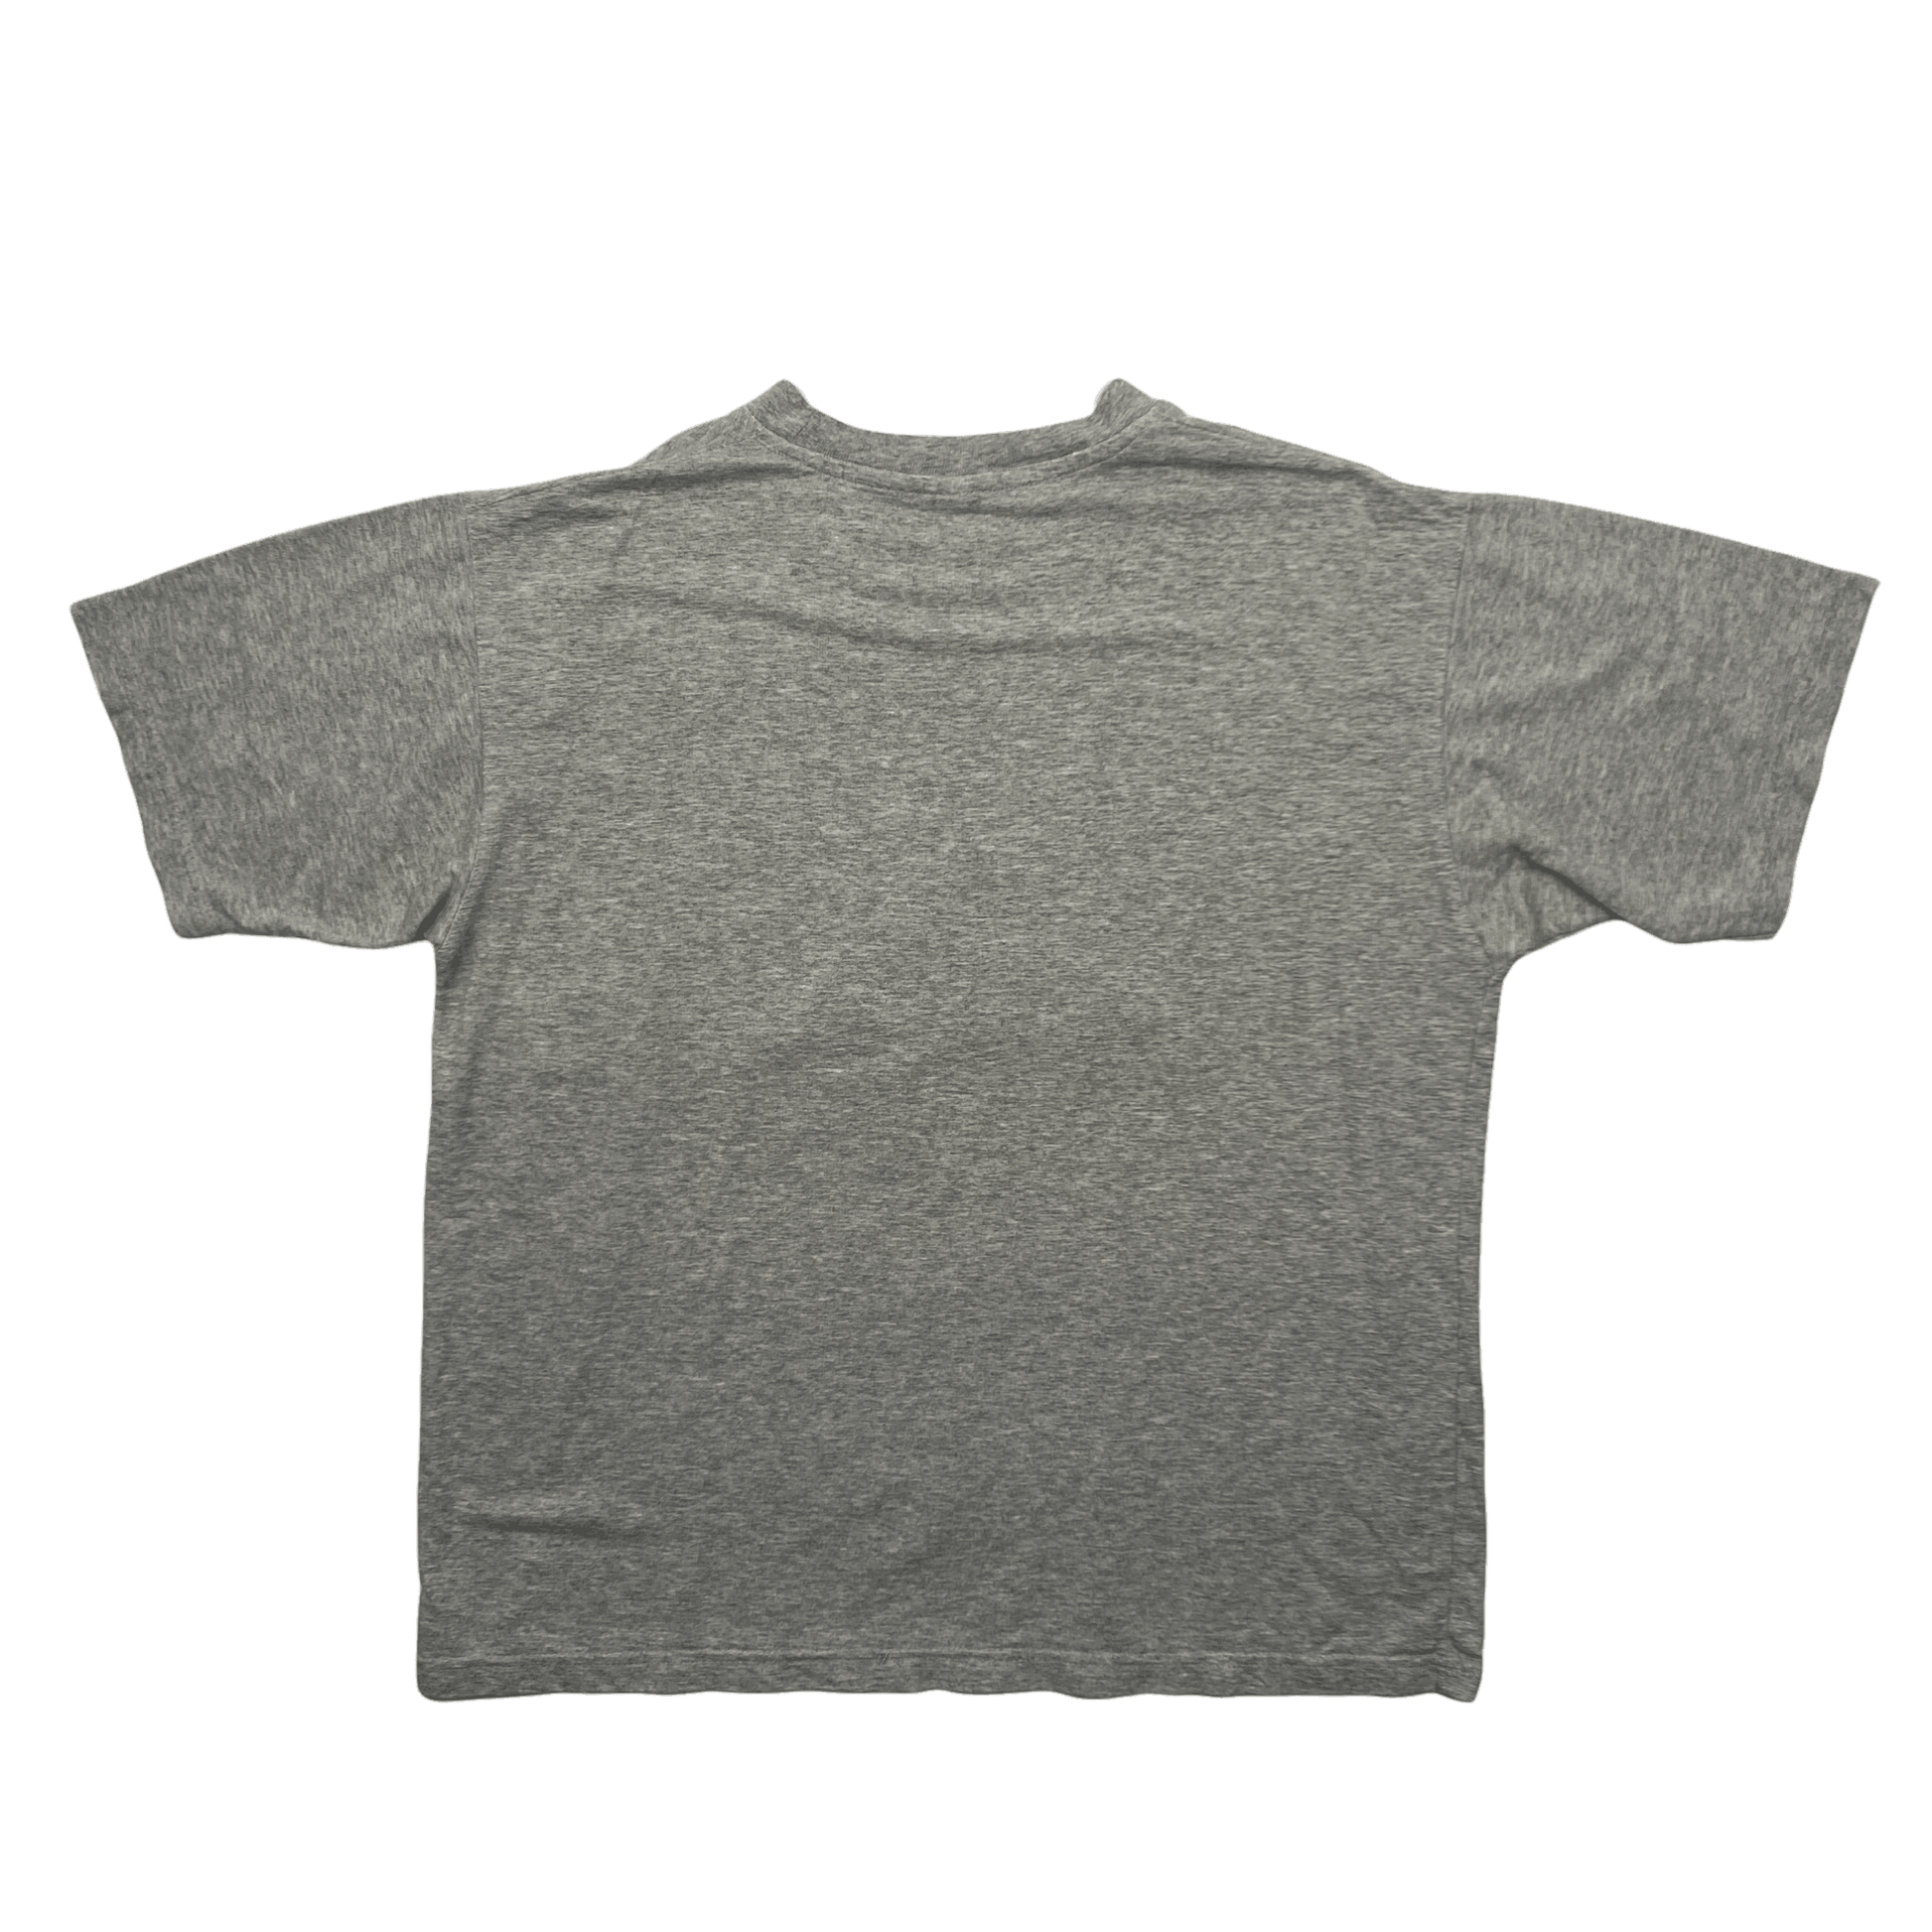 Vintage 80s Grey Adidas Spell-Out Tee - Extra Large (Recommended Size - Large) - The Streetwear Studio